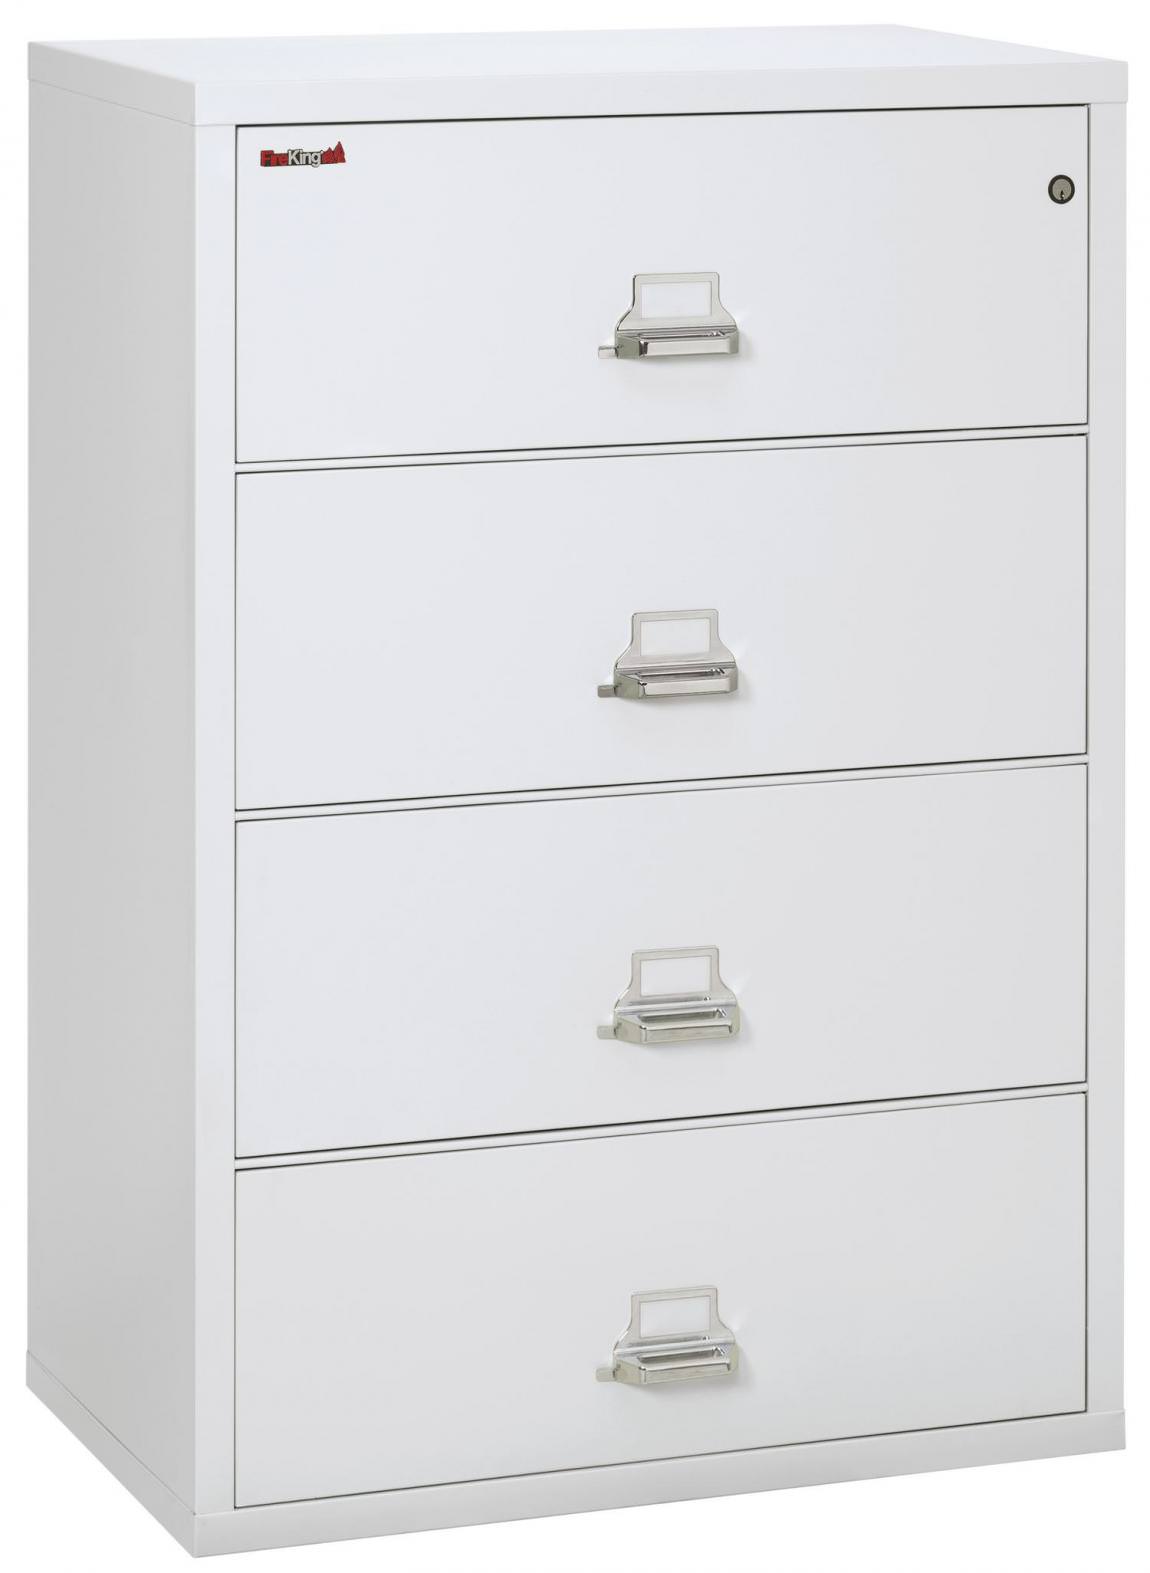 4 Drawer Fireproof Lateral File Cabinet - 38 Inch